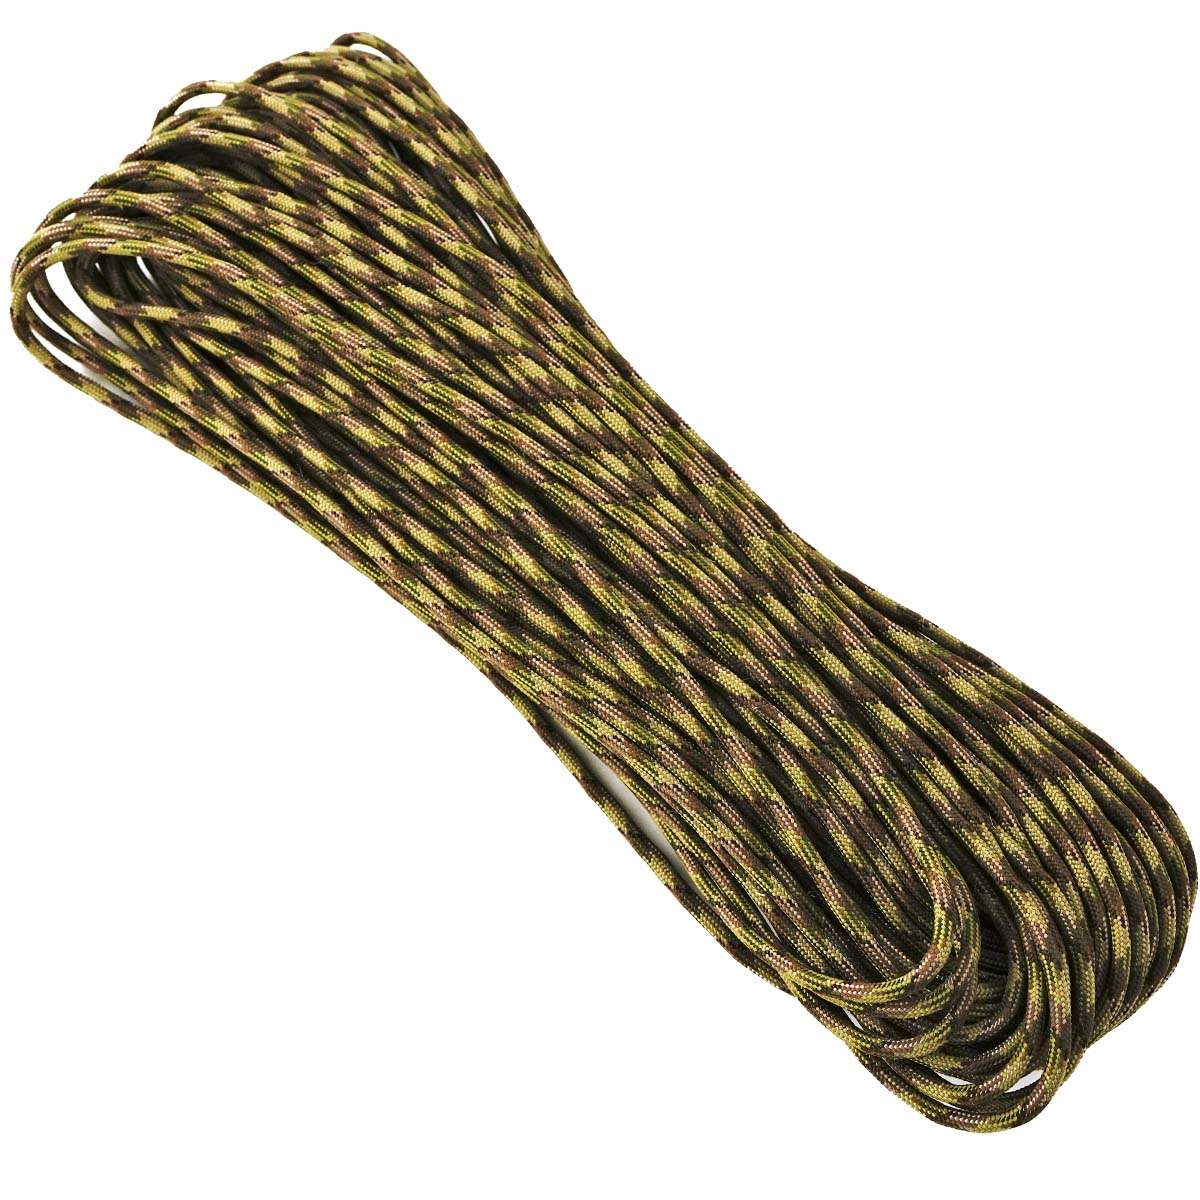 SSA FISH N’ FIRE Type III 550 Paracord - 30M